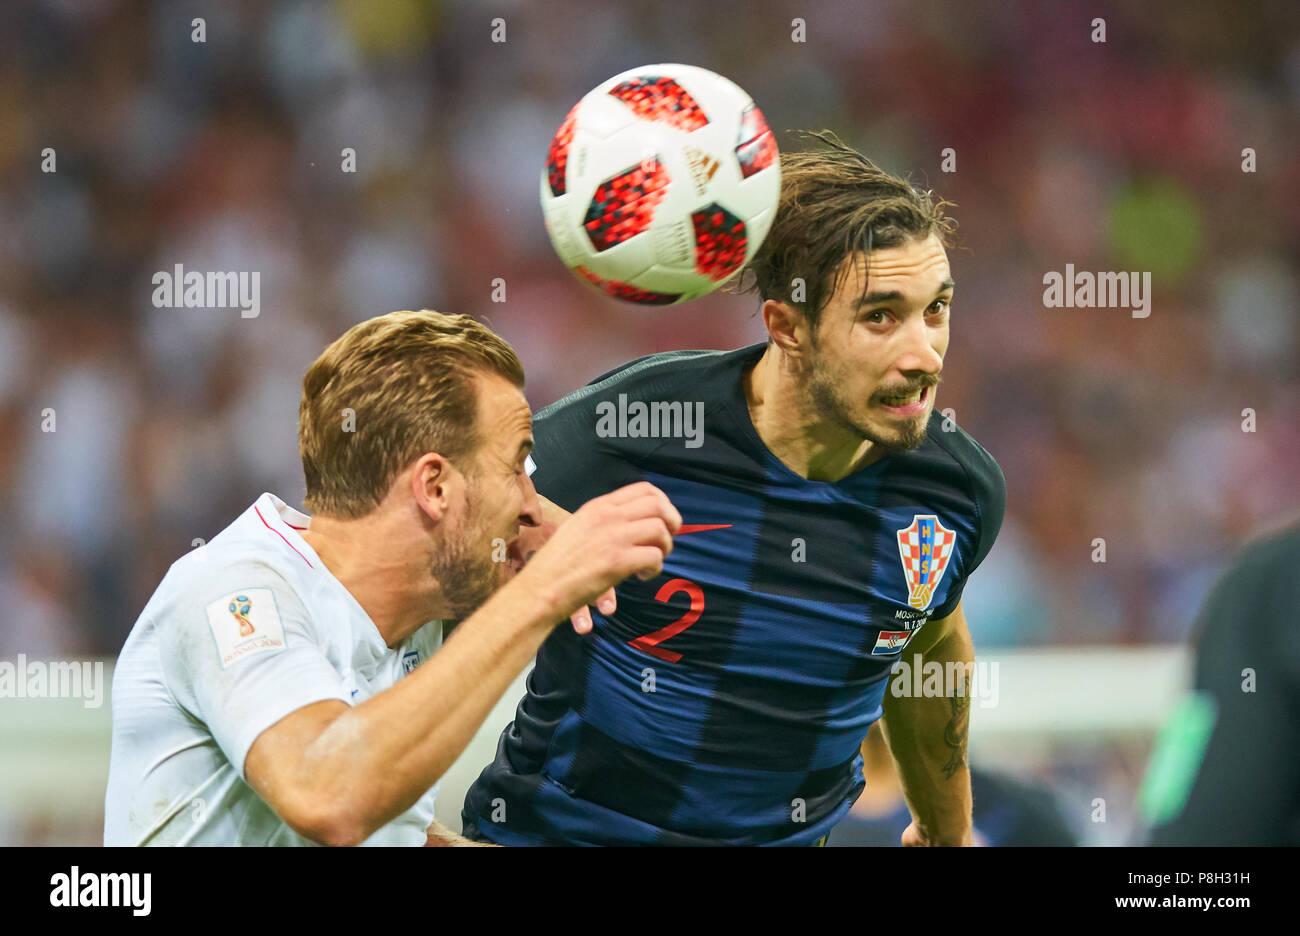 Moscow, Russia. 11th July 2018. England - Croatia, Soccer, Moscow, July 11, 2018 Harry KANE, England 9   compete for the ball, tackling, duel, header against Sime VRSALJKO, Croatia Nr.2  ENGLAND  - CROATIA  FIFA WORLD CUP 2018 RUSSIA, Semifinal, Season 2018/2019,  July 11, 2018 in Moscow, Russia. © Peter Schatz / Alamy Live News Stock Photo